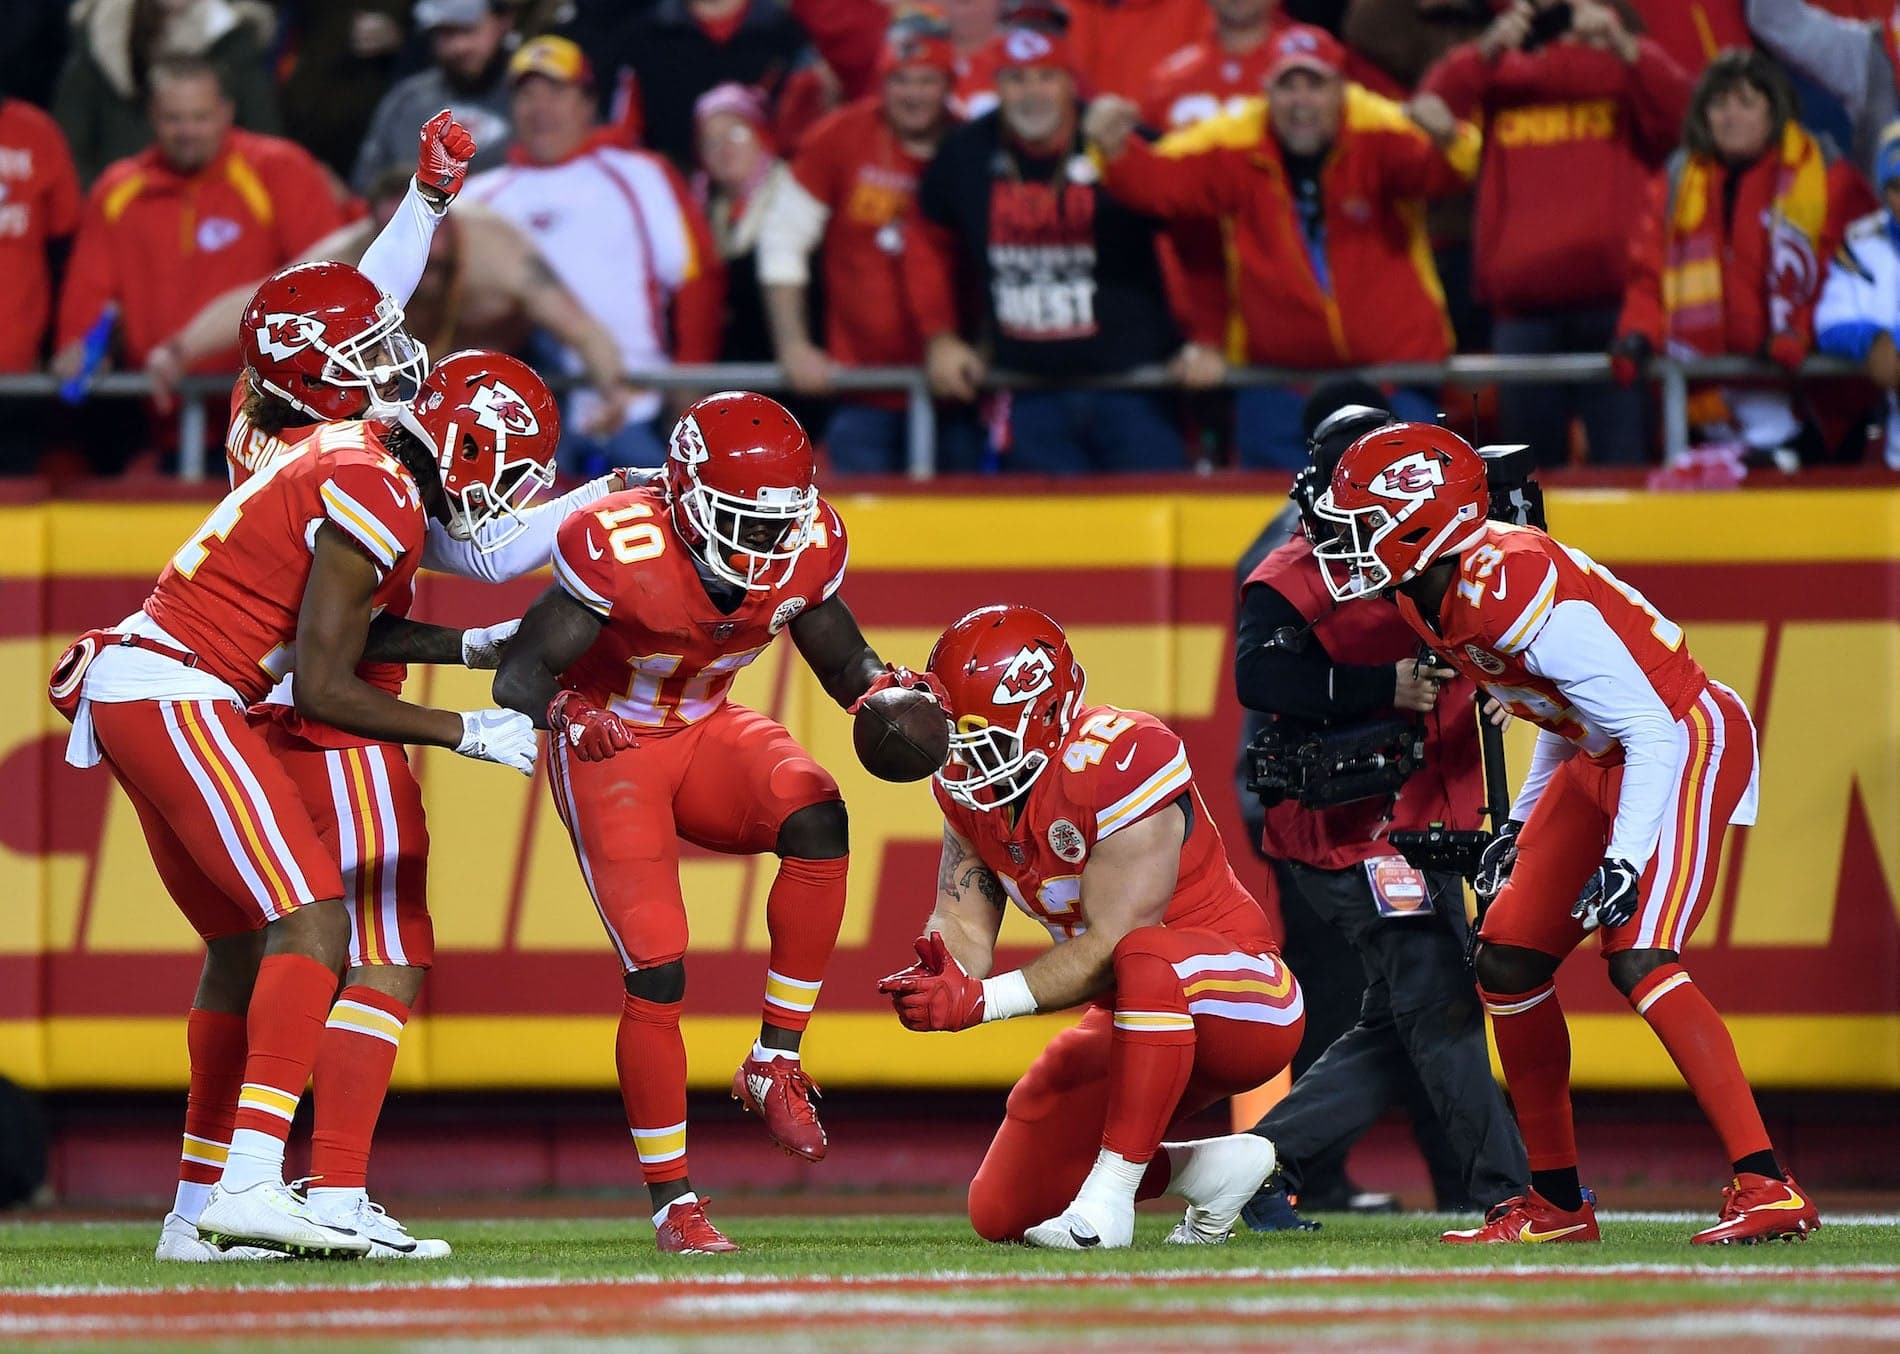 Watch This ‘Pit Stop’ Celebration by the NFL’s Kansas City Chiefs